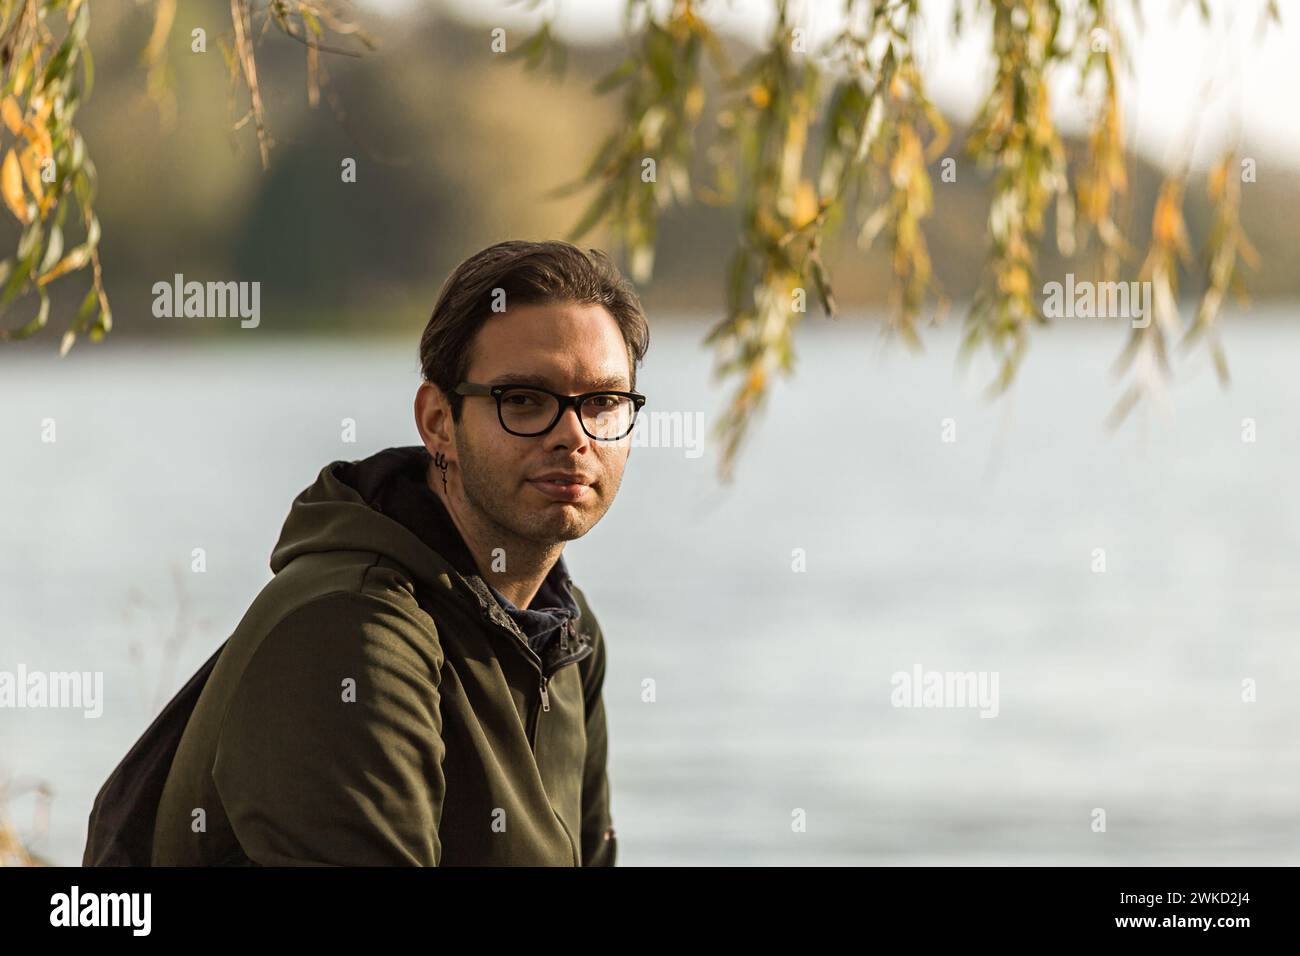 A portrait of a man with glasses outdoor in nature Stock Photo